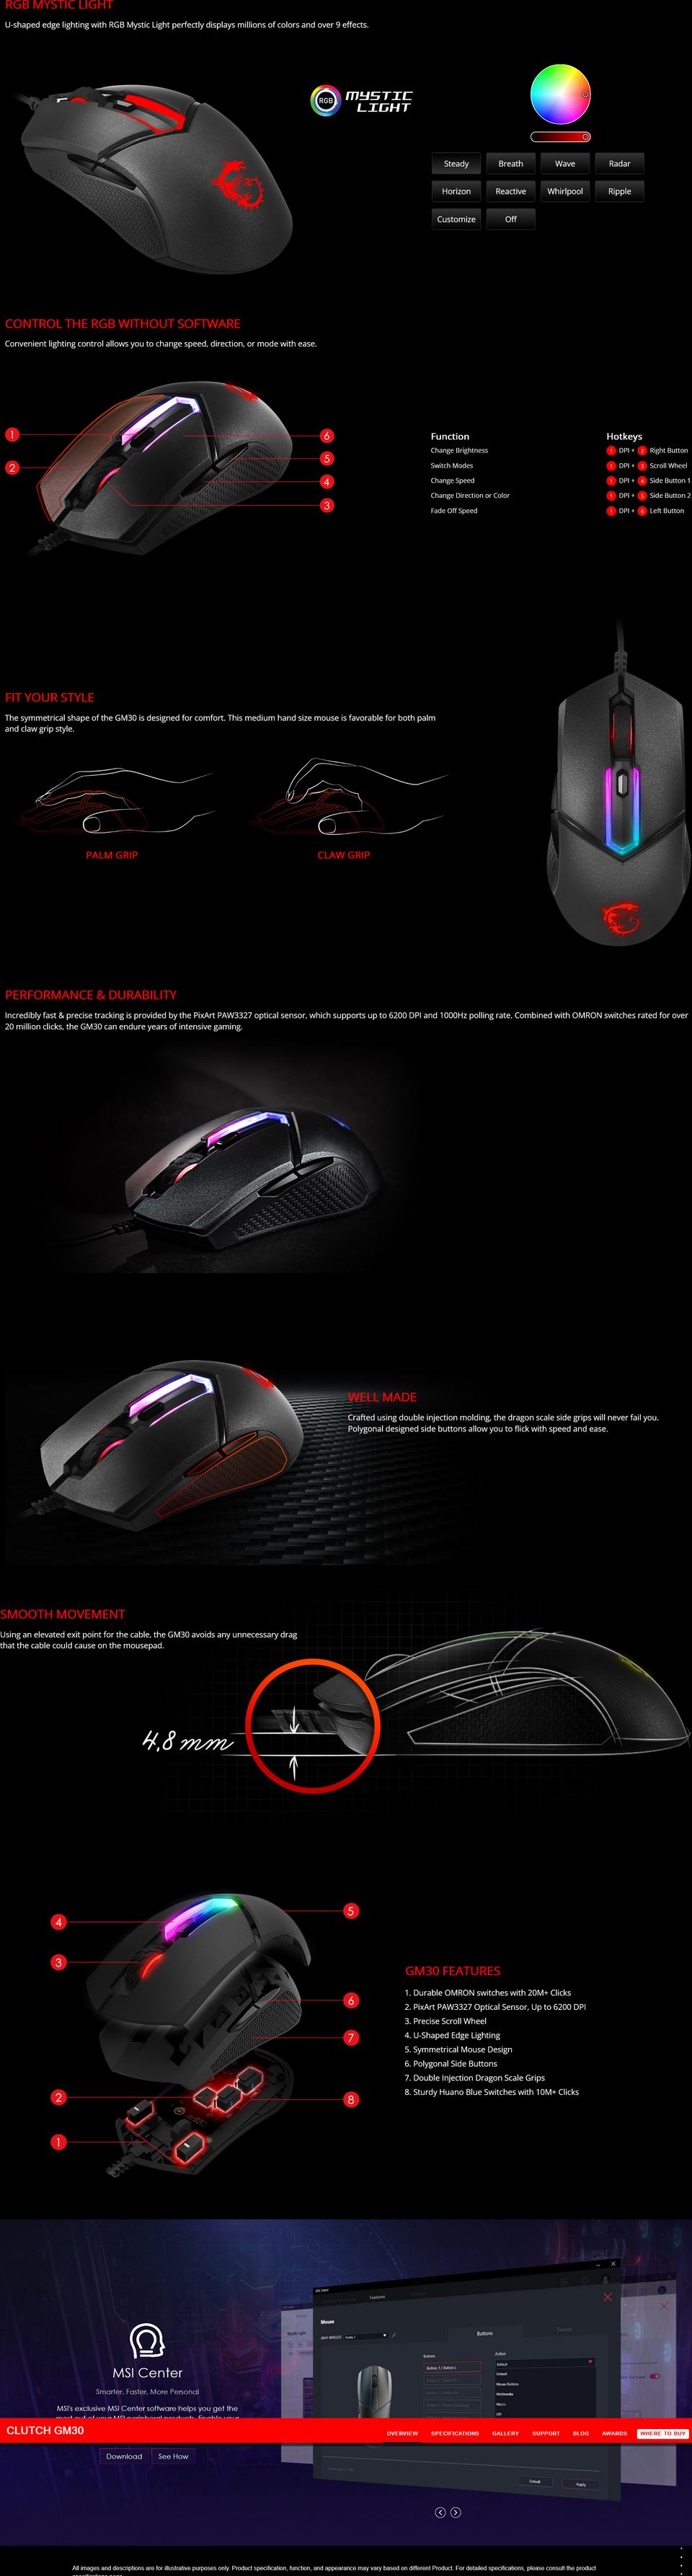 msi clutch gm30 gaming mouse